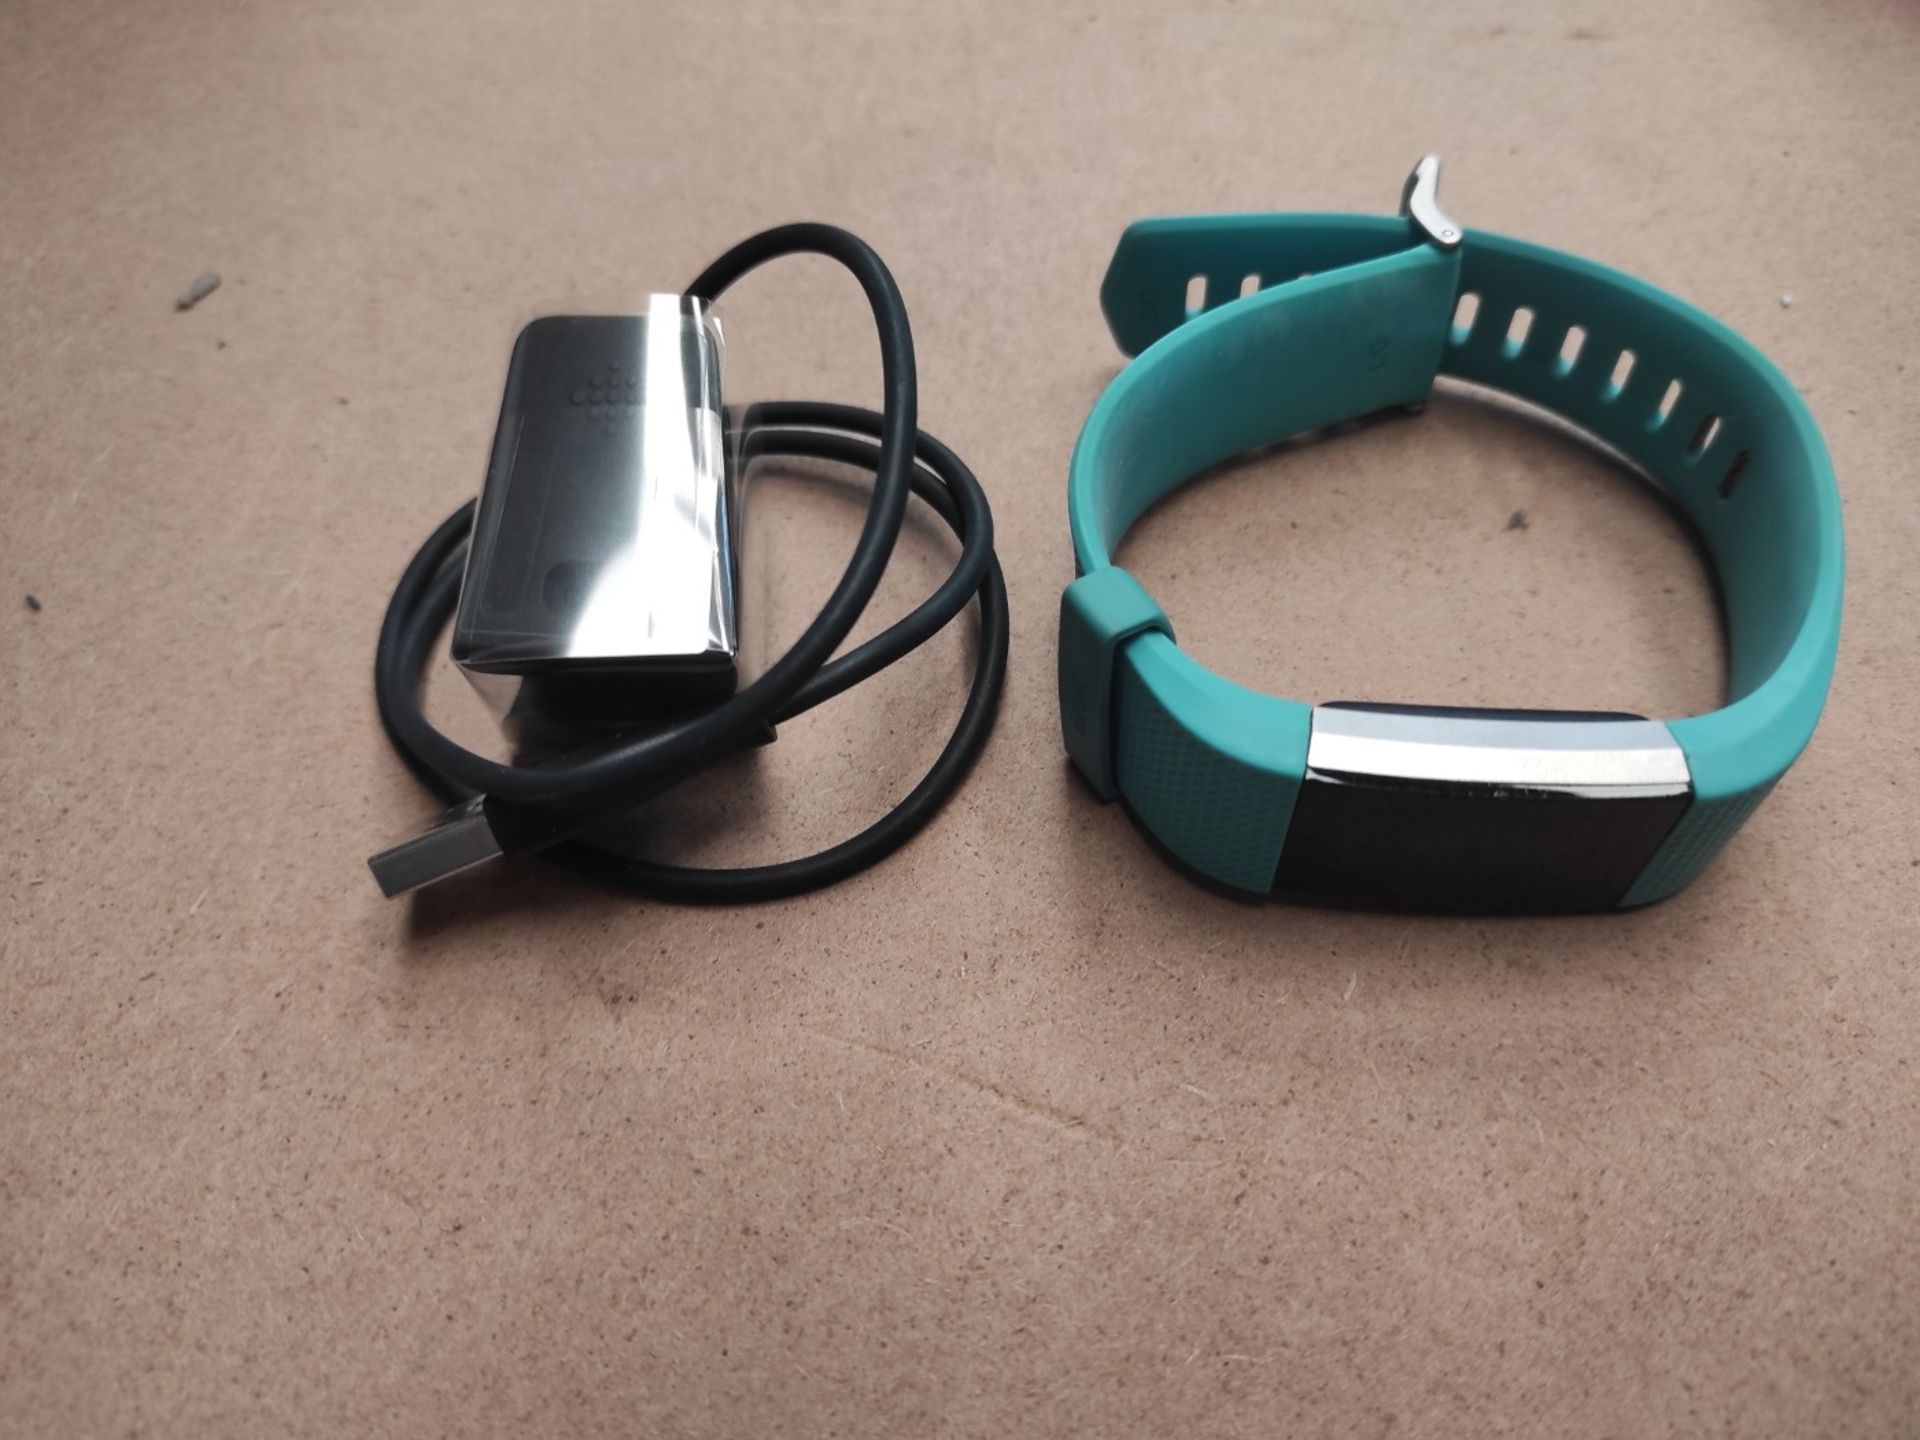 RRP £115.00 [CRACKED] Fitbit Charge 2 Activity Tracker with Wrist Based Heart Rate Monitor - Teal - Image 3 of 3